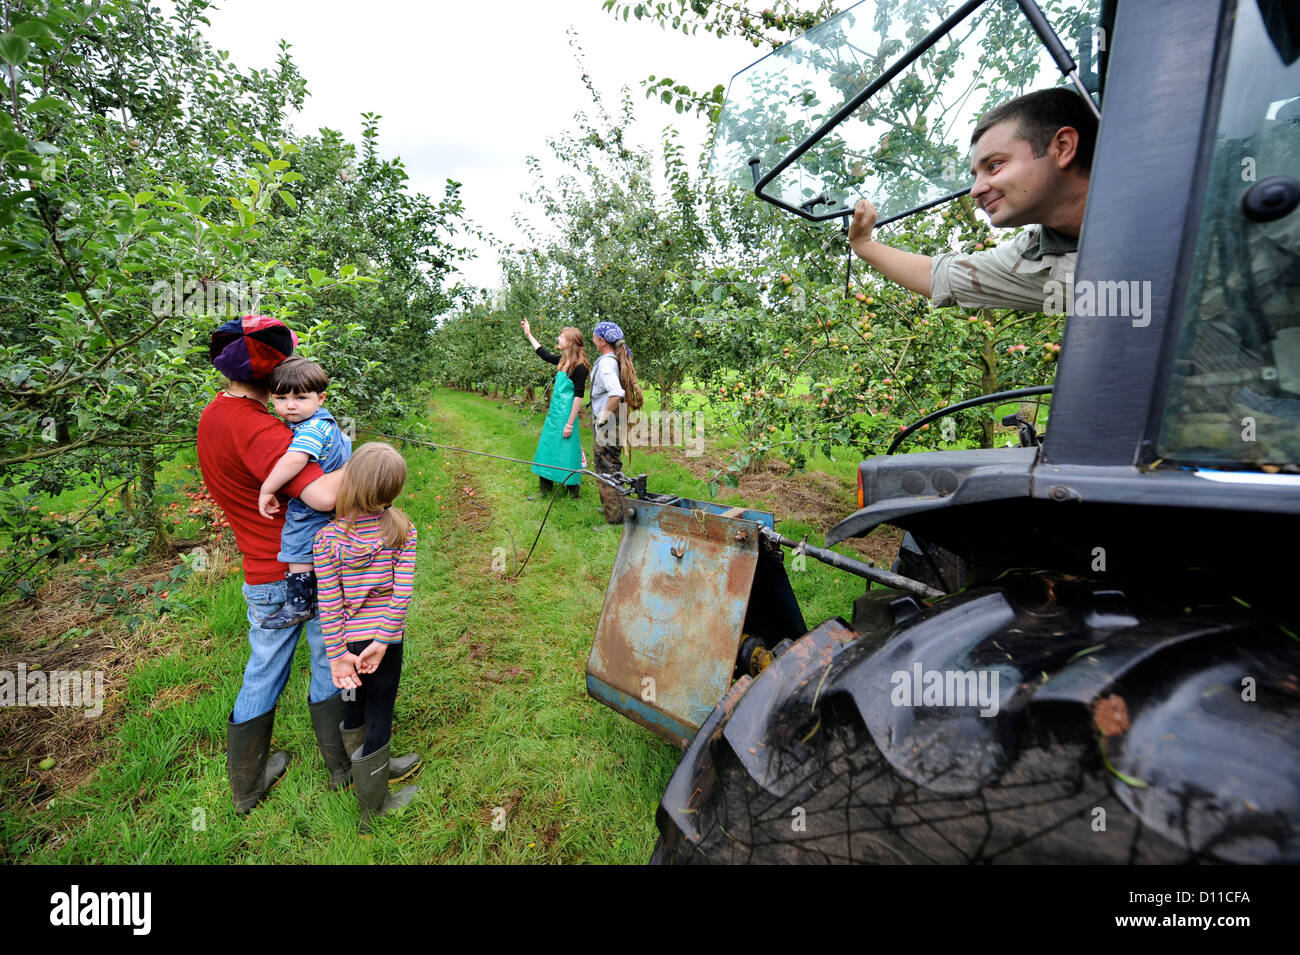 Cider making at Broome Farm near Ross-on-Wye UK where there is free camping and tasting to volunteer apple pickers - a farmer wo Stock Photo